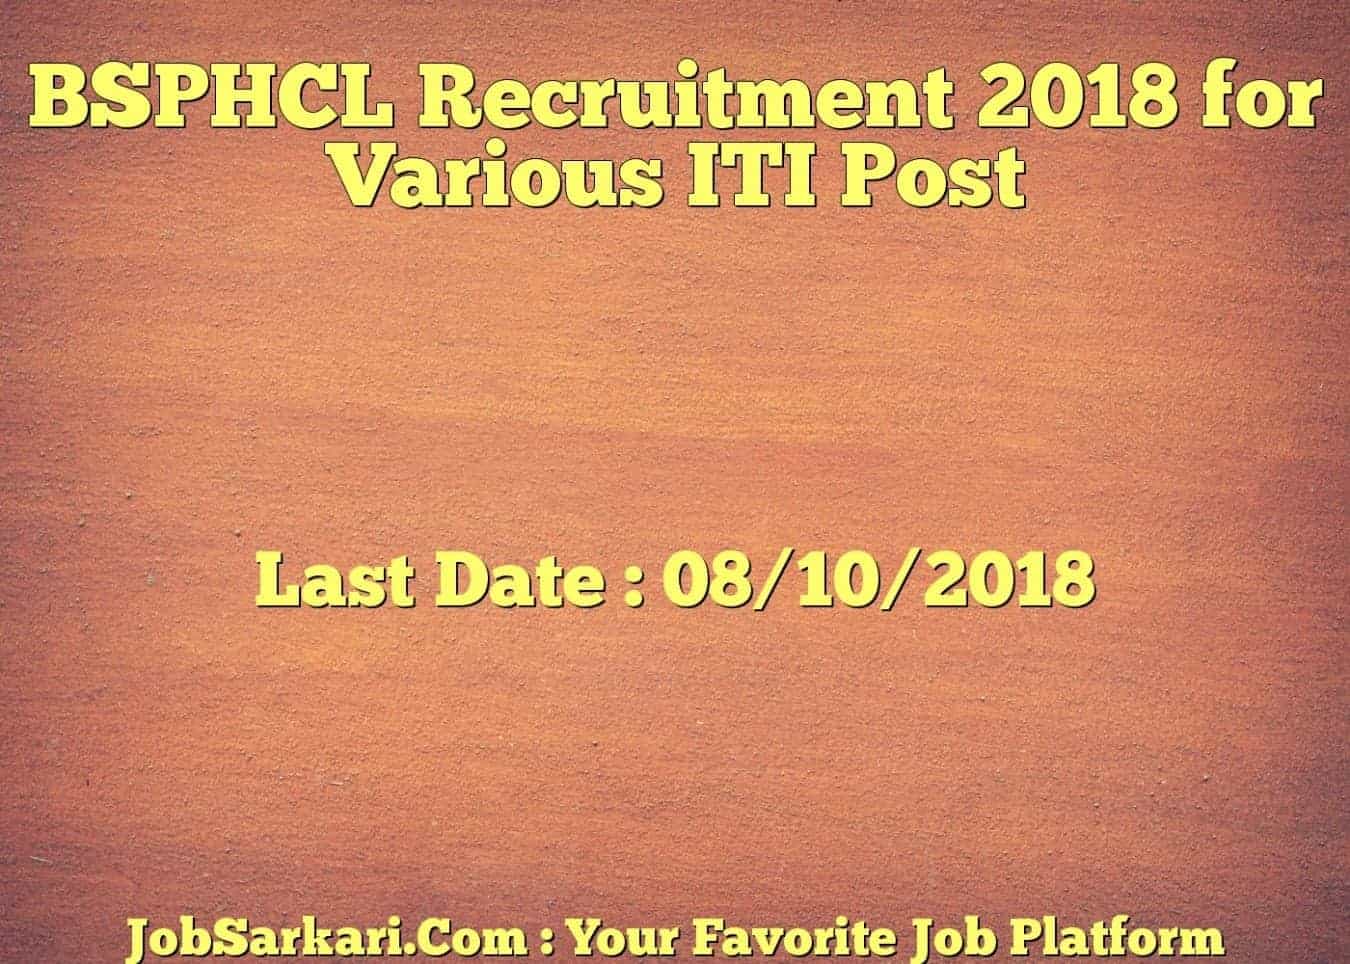 BSPHCL Recruitment 2018 for Various ITI Post